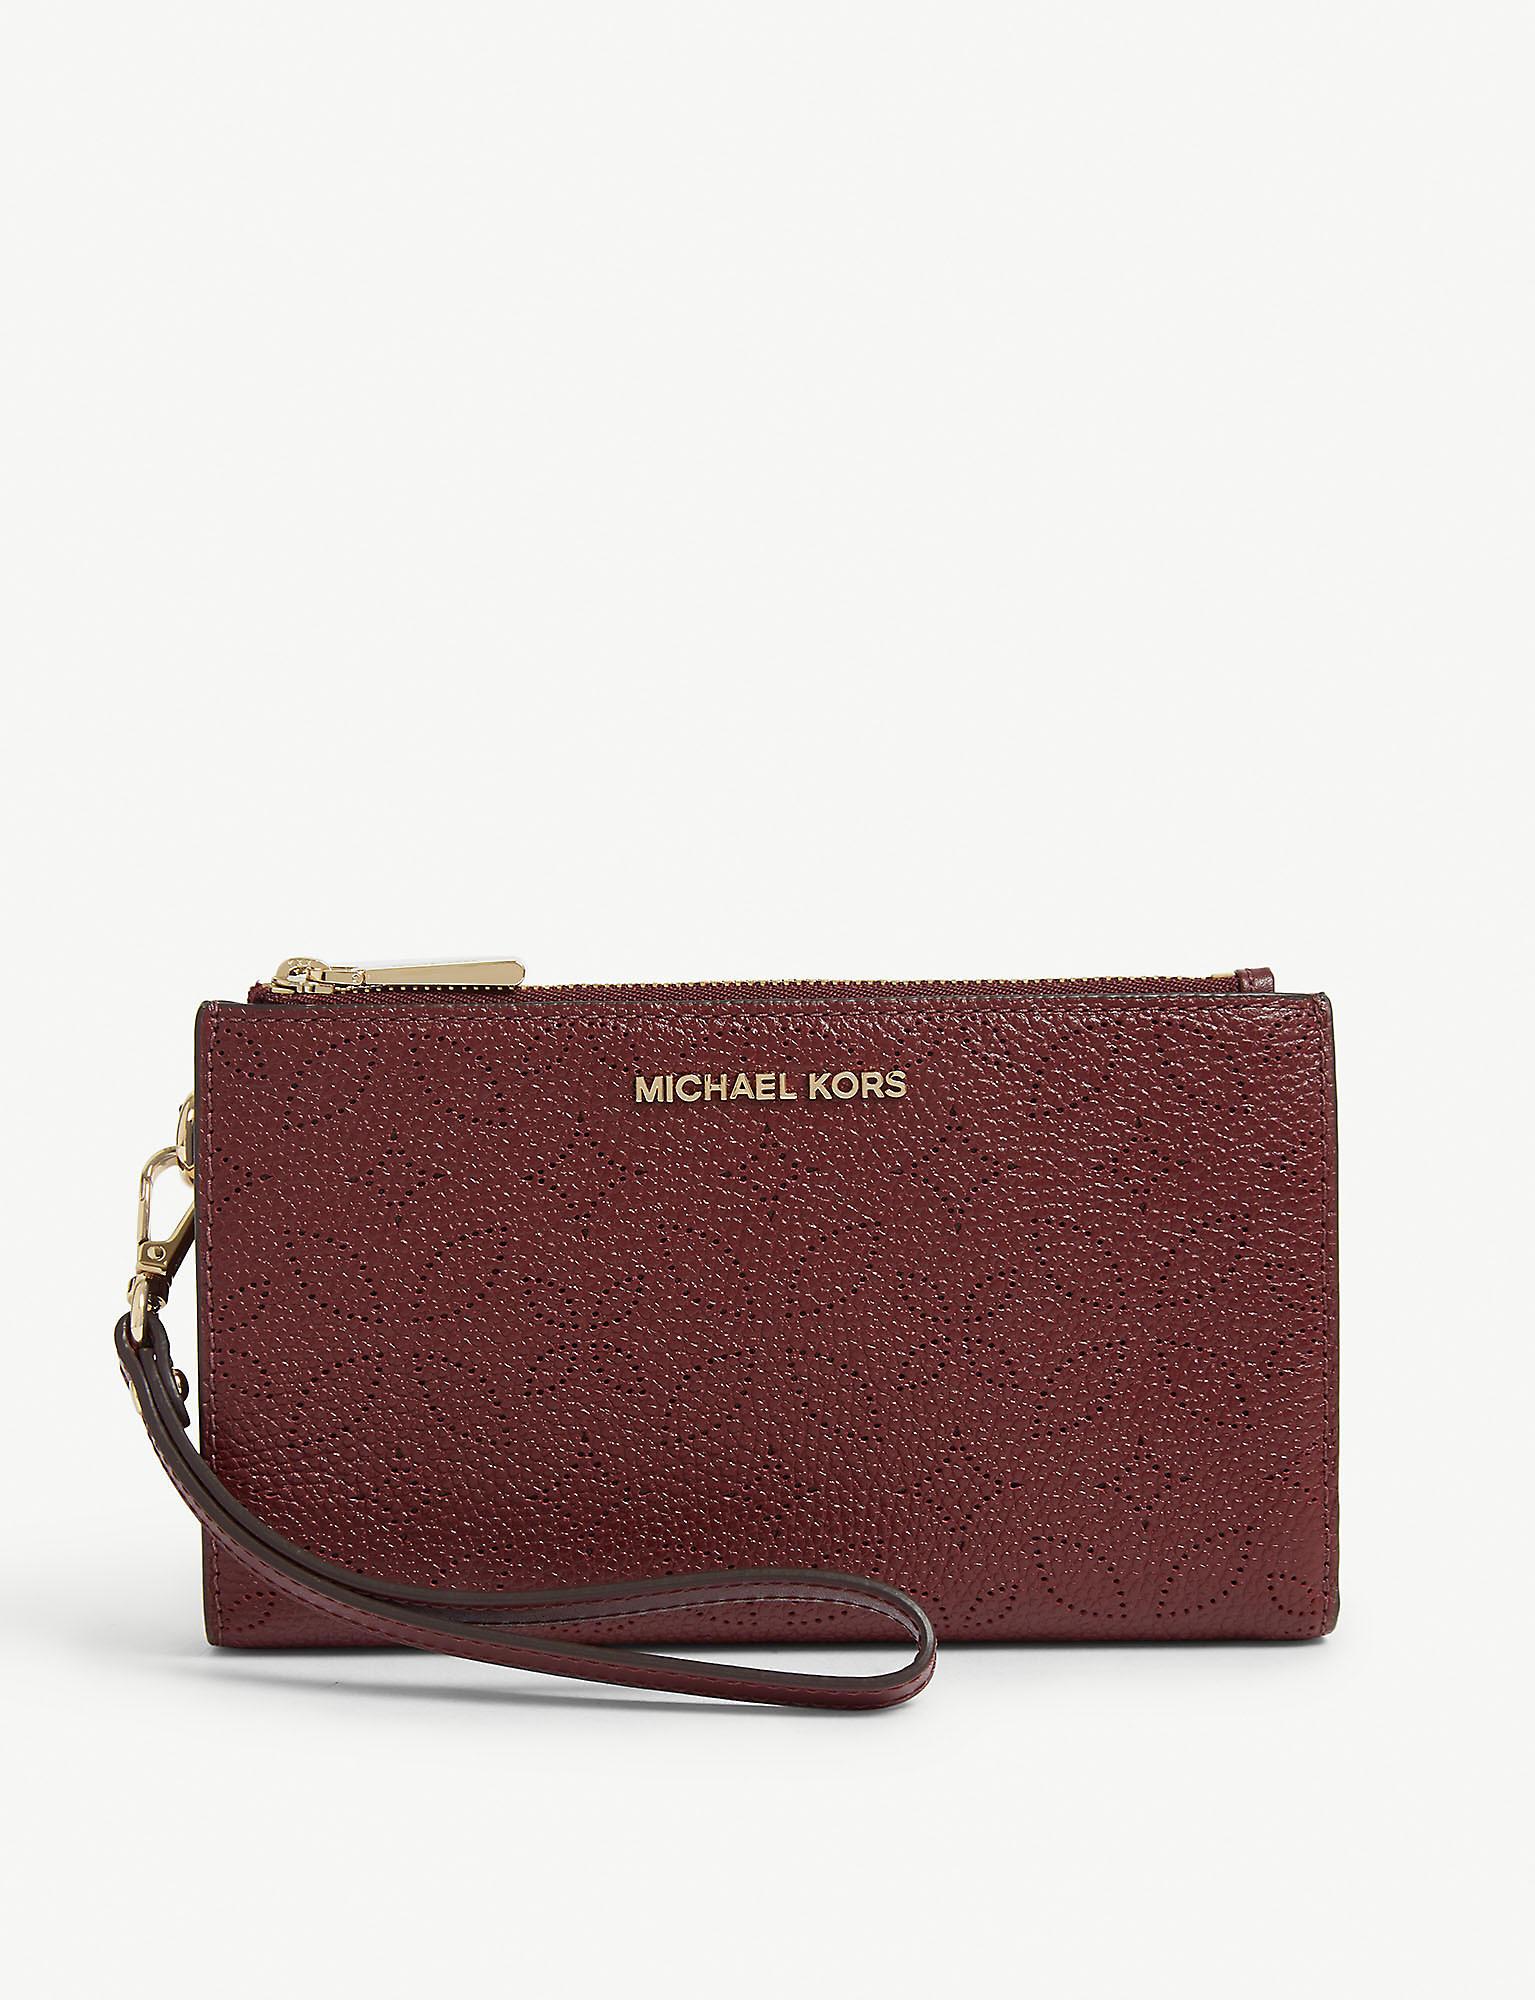 MICHAEL Michael Kors Floral Pattern Leather Wristlet in Red - Lyst